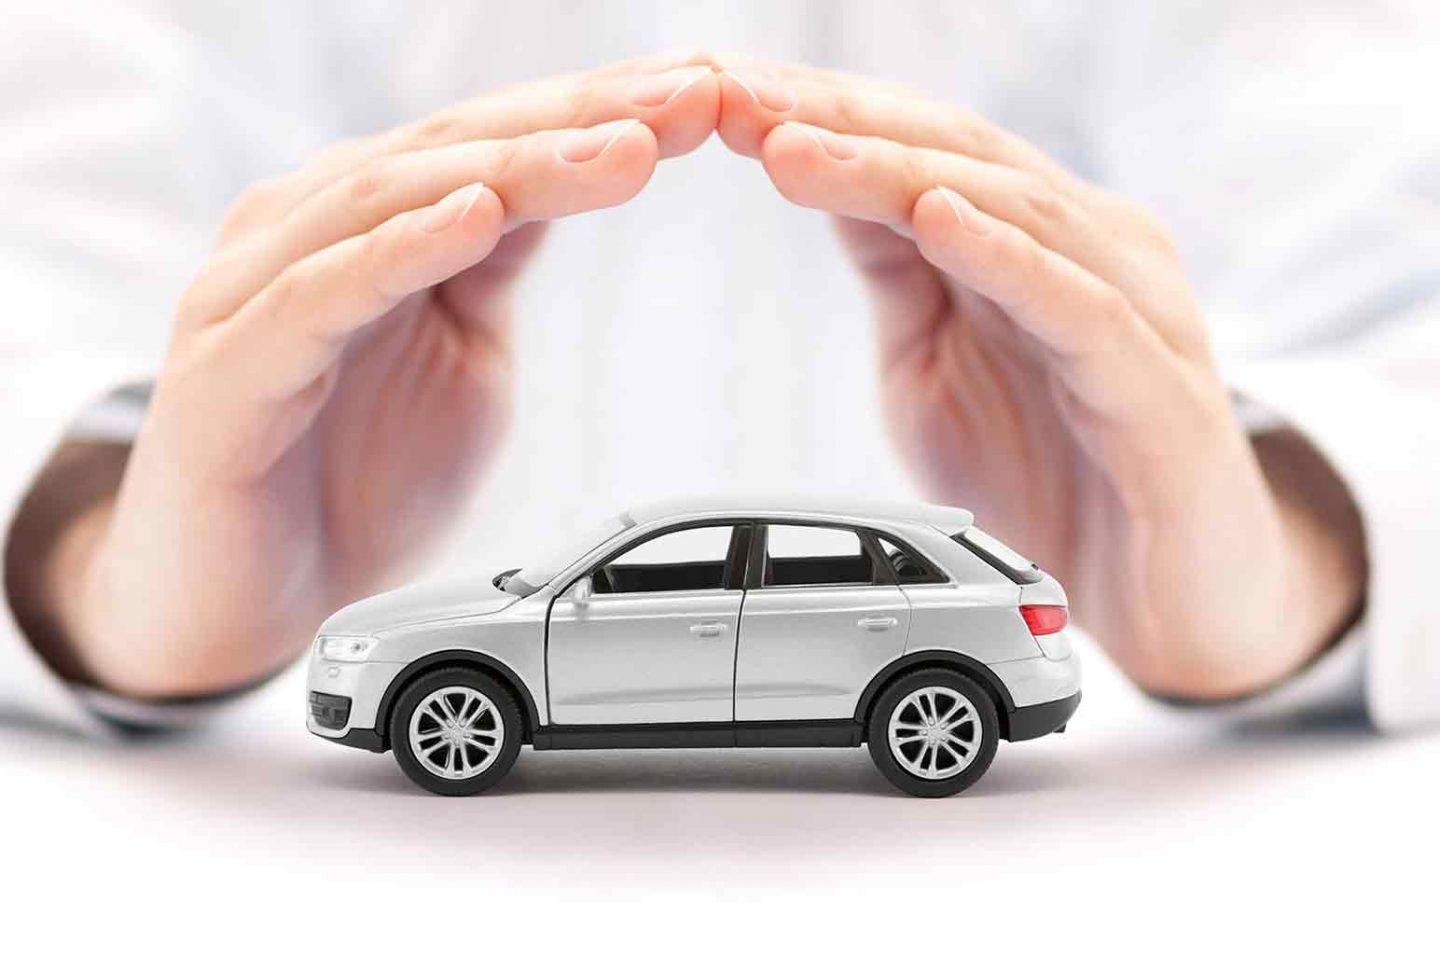 How to Get the Best Auto Insurance Deal